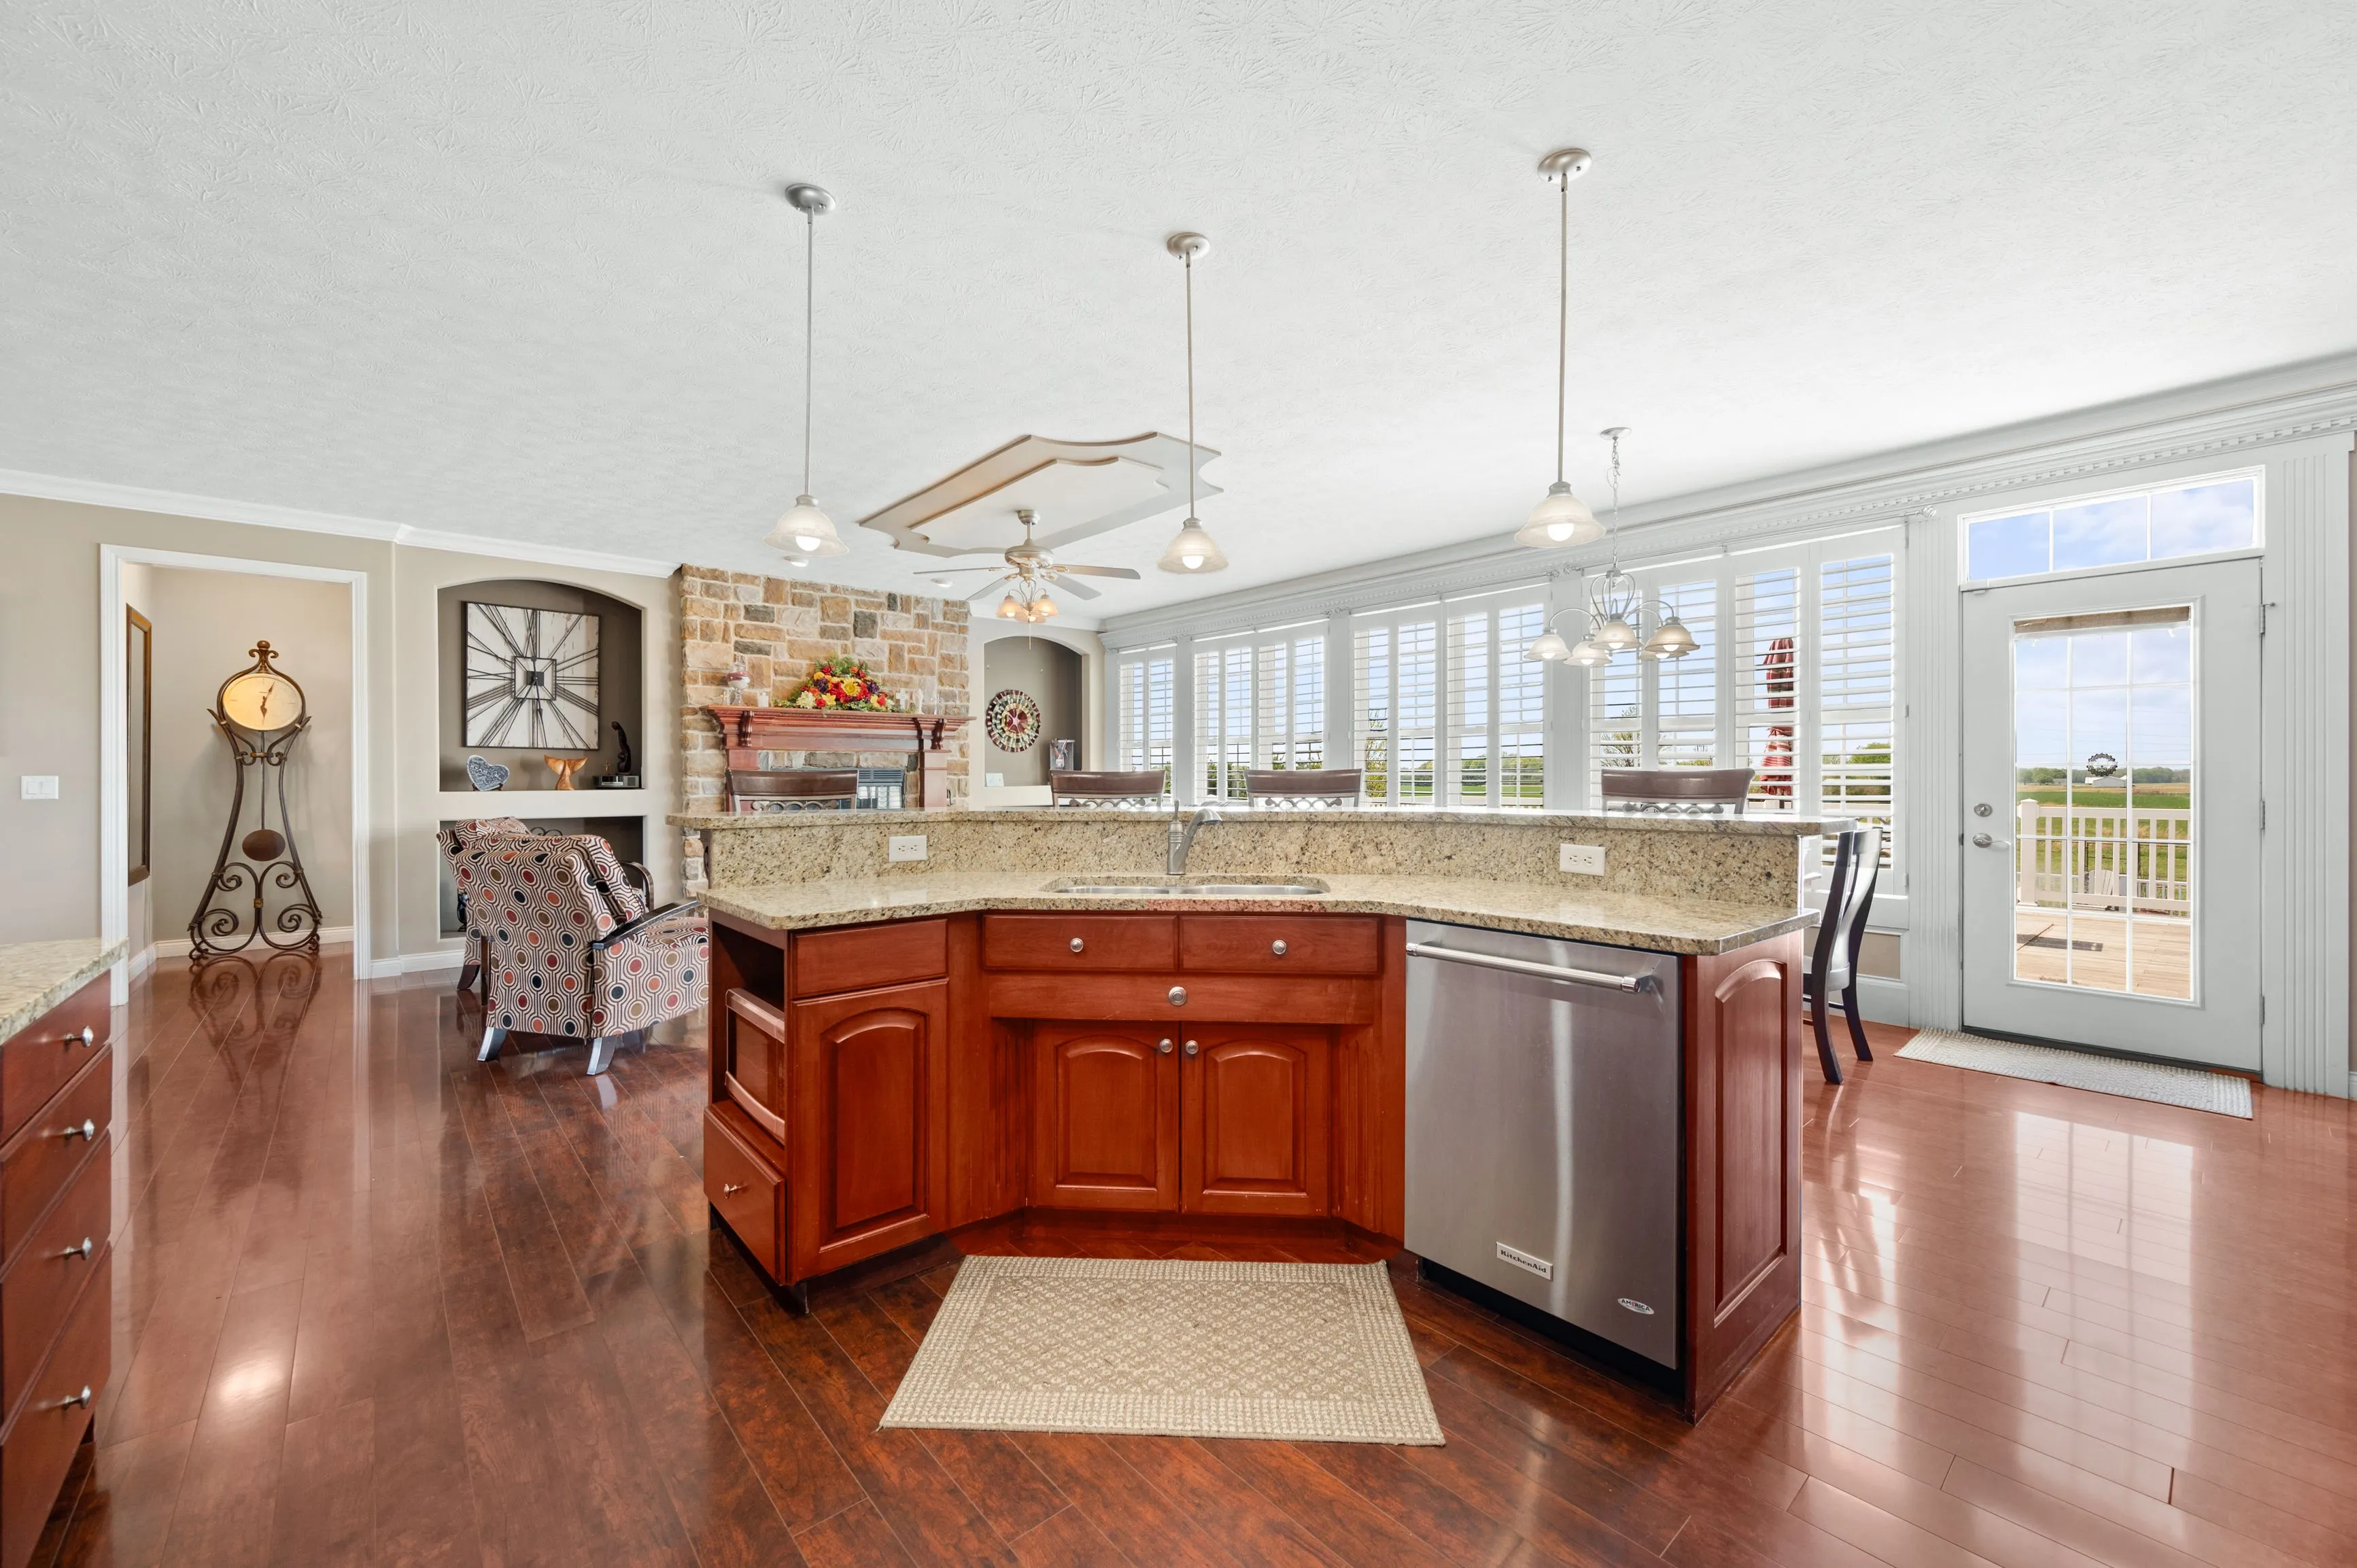 Spacious kitchen with cherry wood cabinets, stainless steel appliances, and glossy hardwood floors.